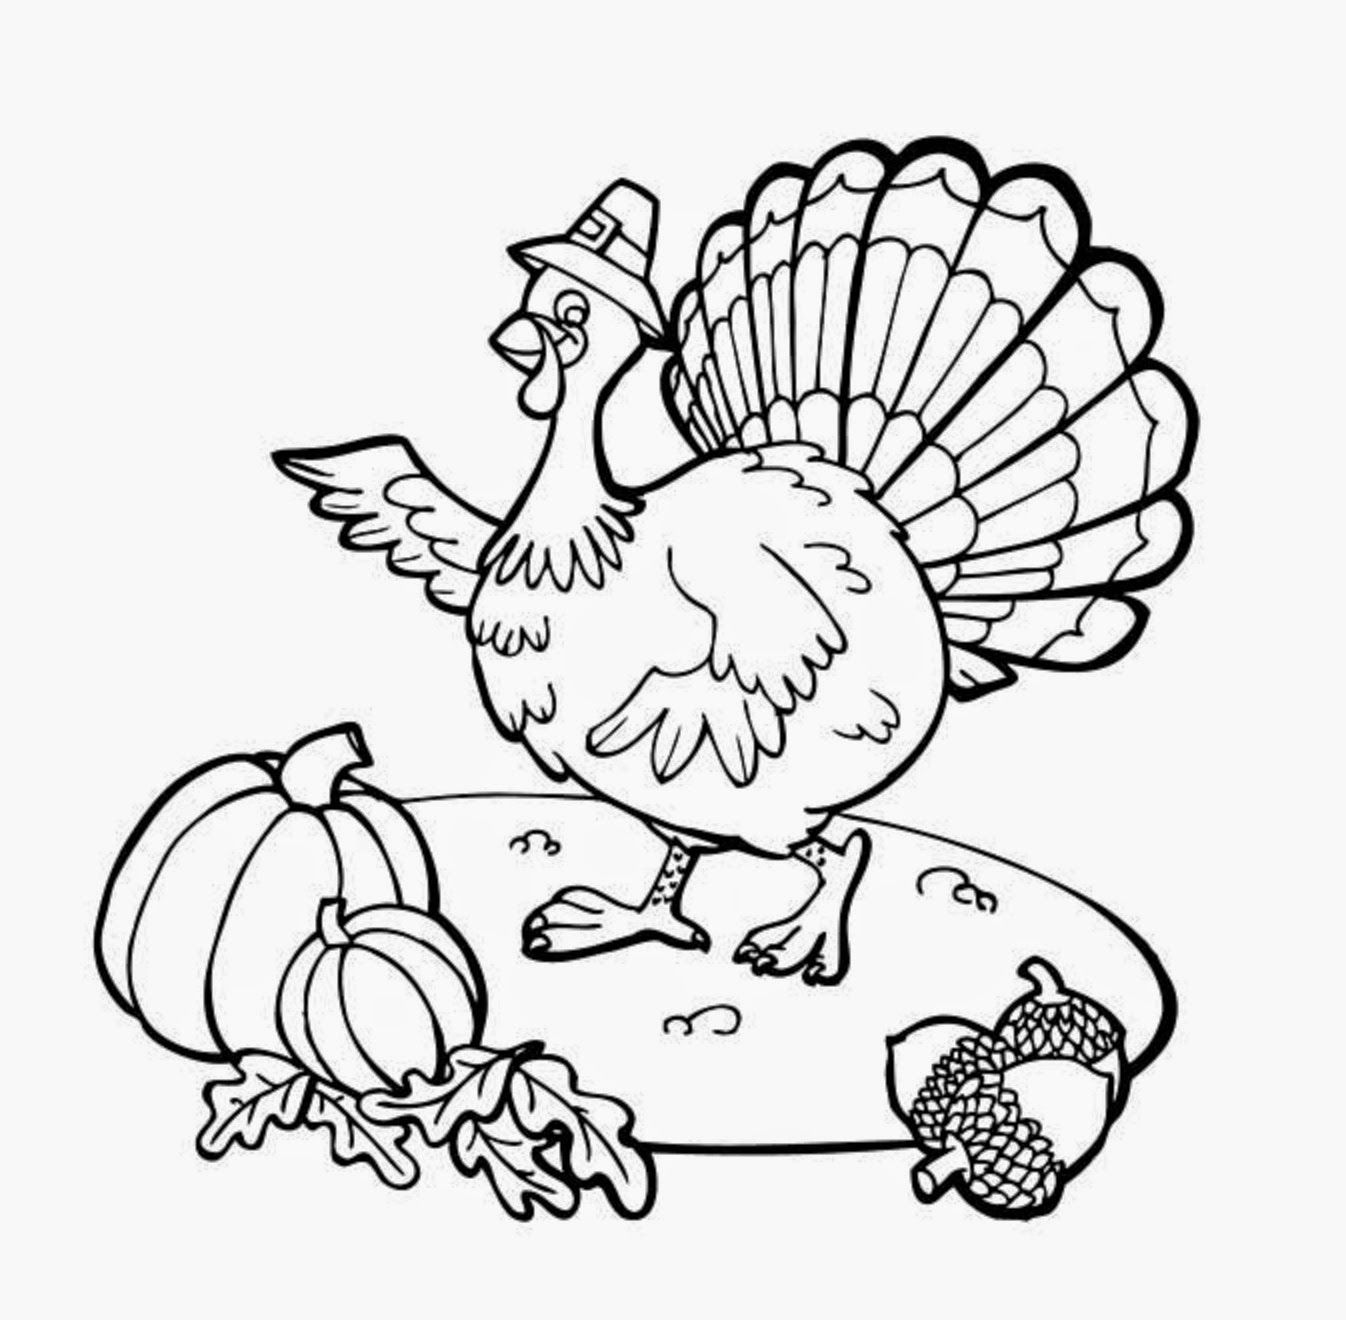 Thanksgiving Drawings Wallpapers - Wallpaper Cave